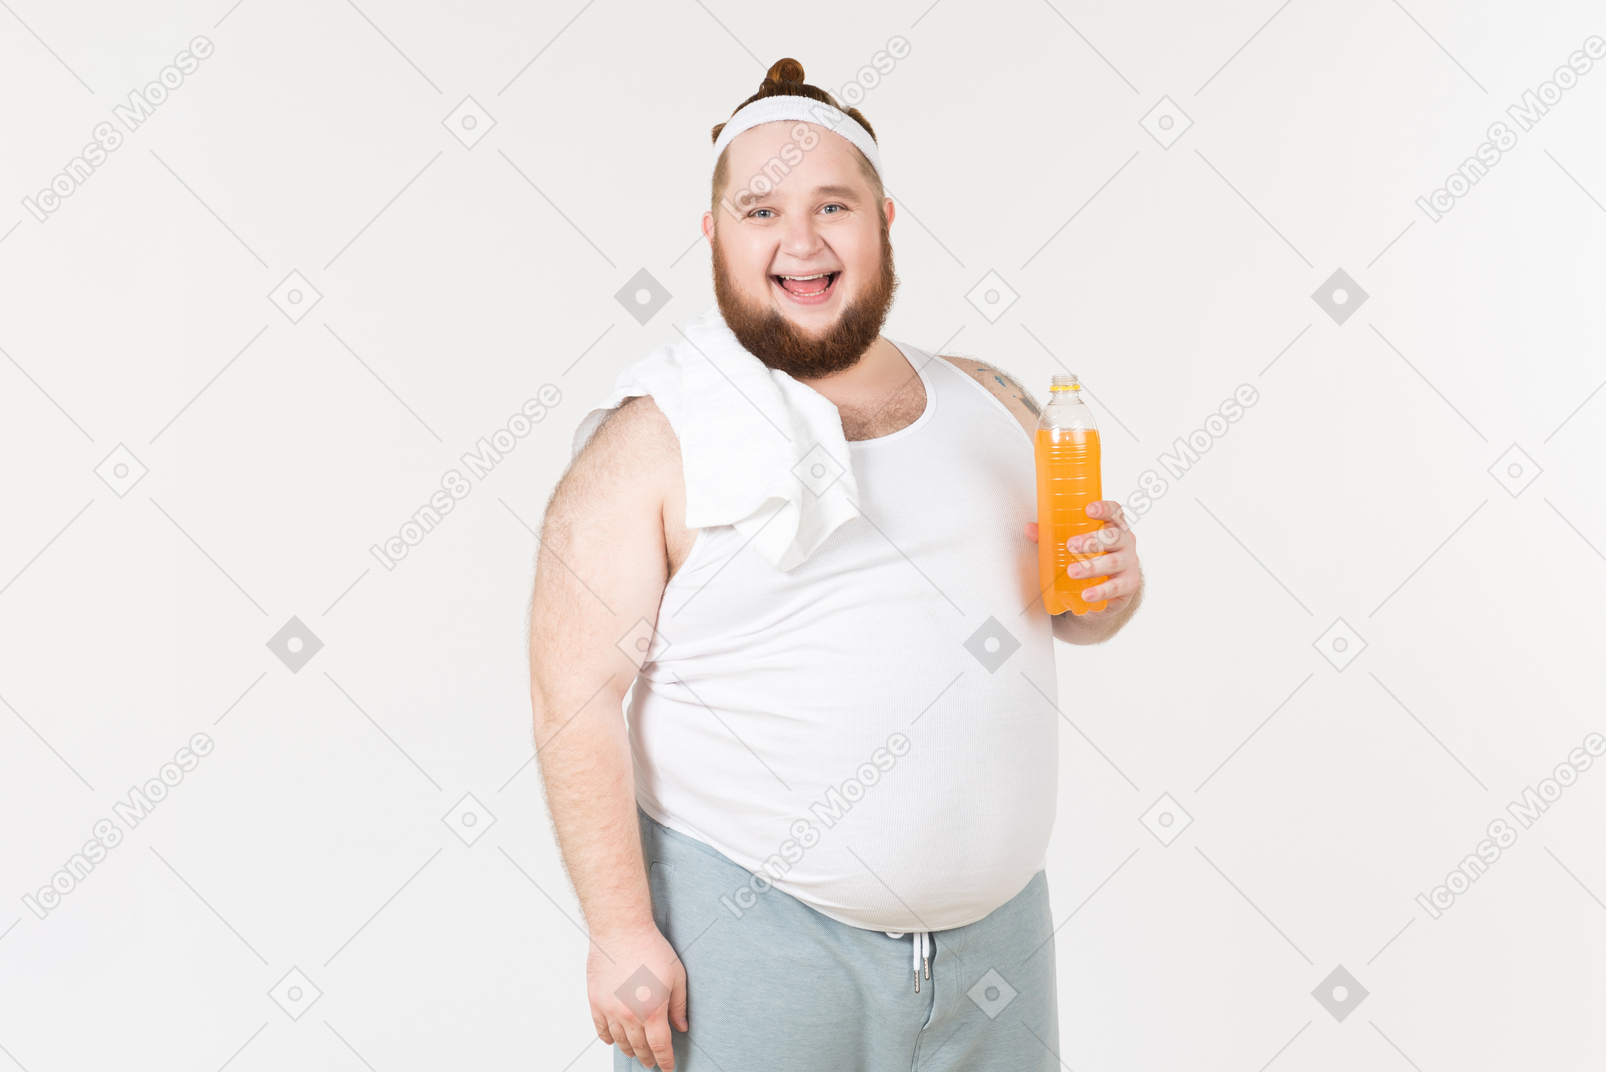 A fat man in sportswear holding a bottle of soft drink and smiling